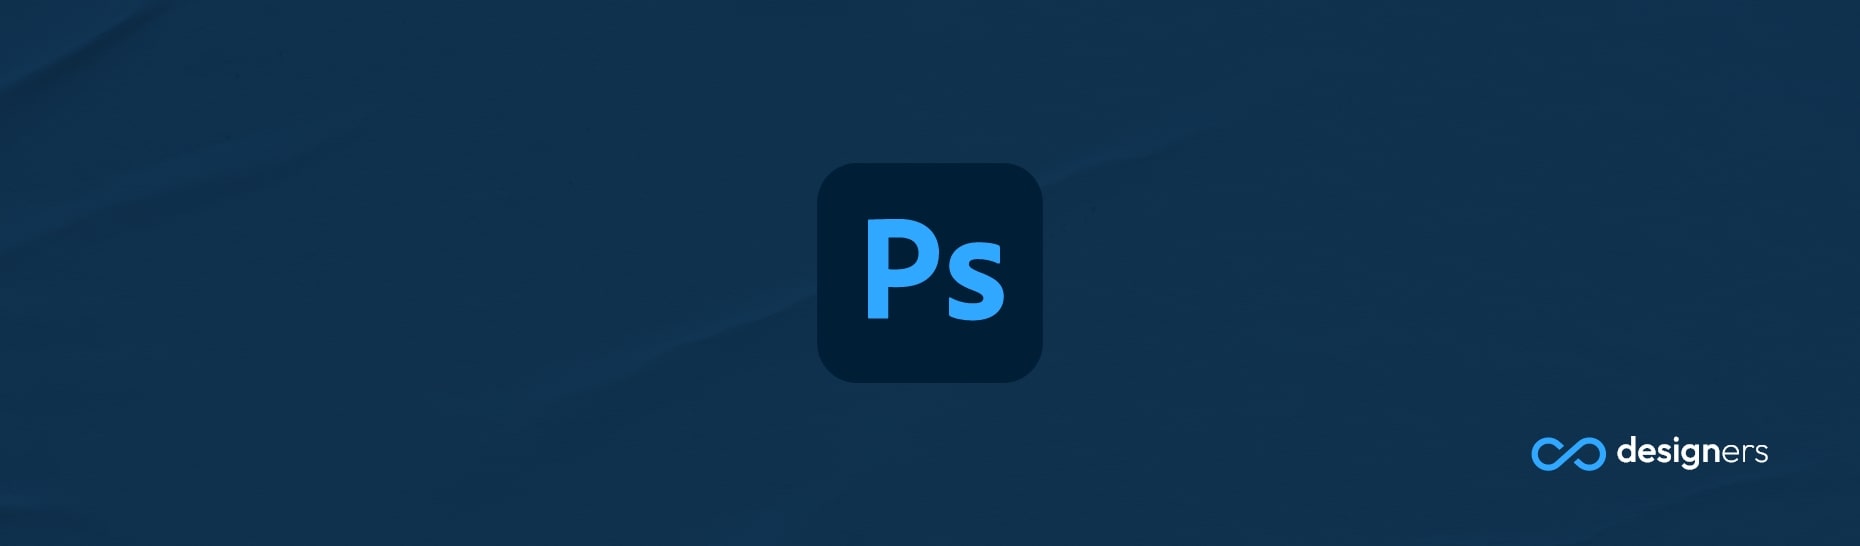 Can Photoshop Save as Vector?